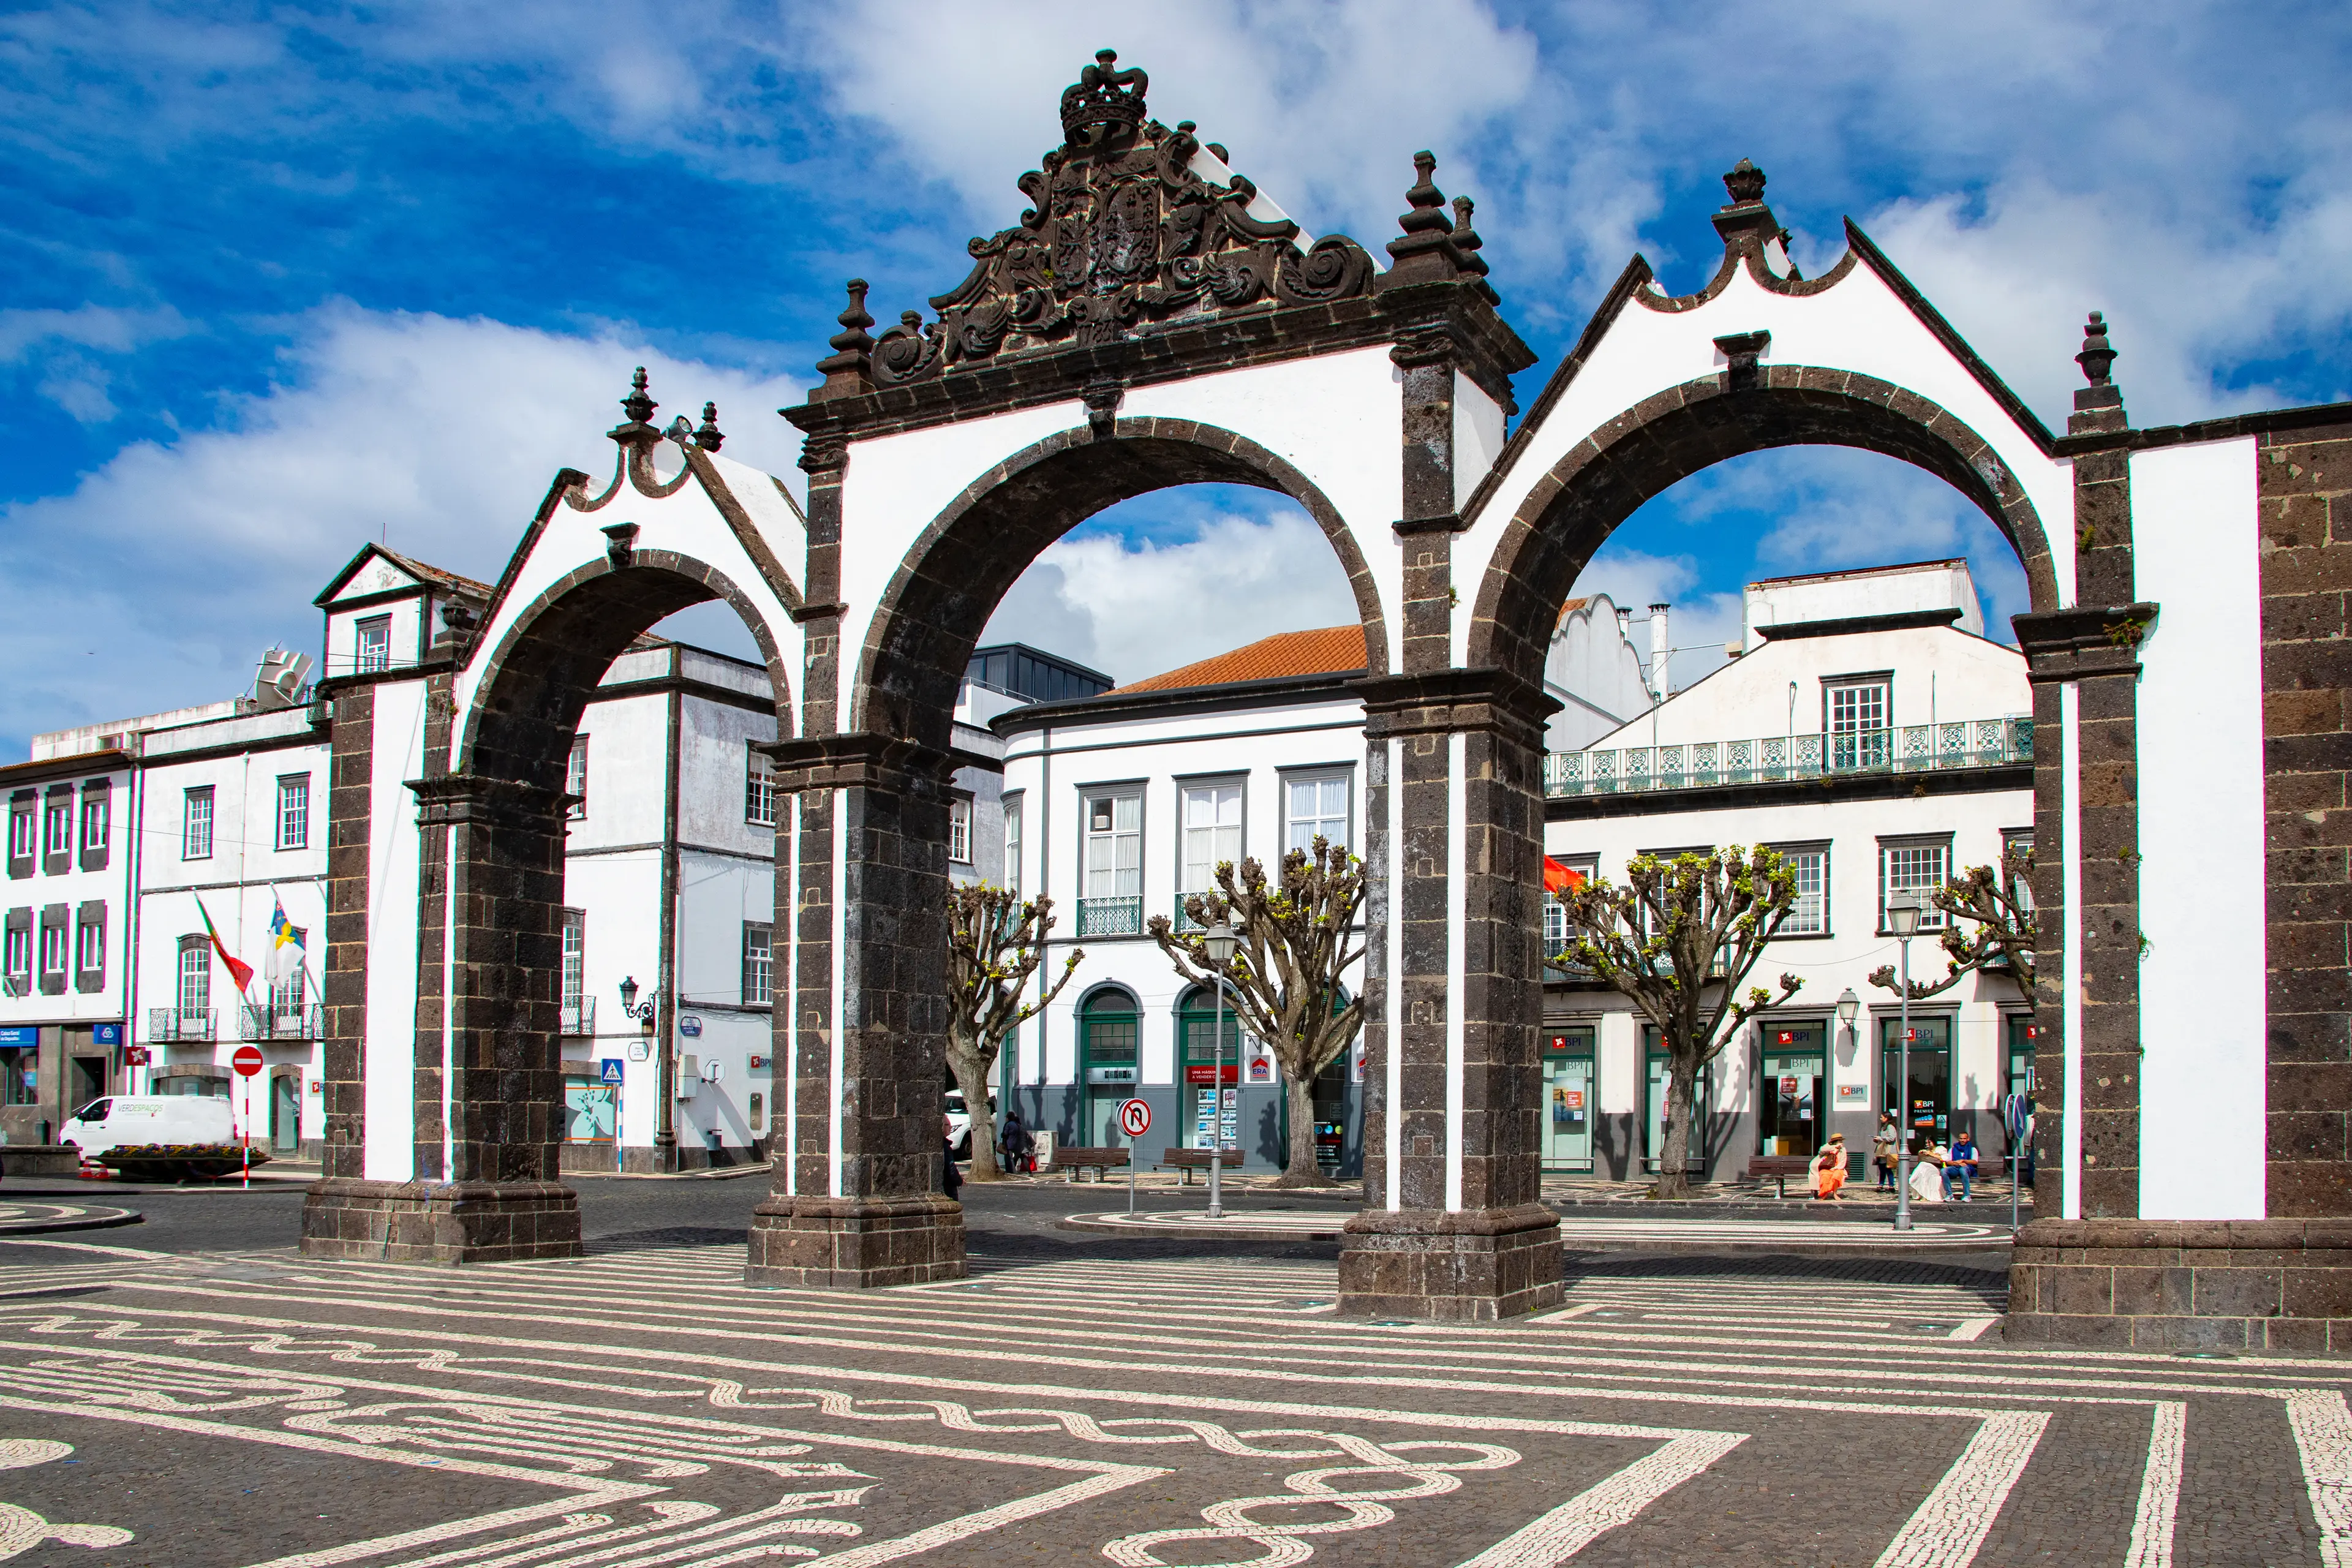 6-Day Local-Experience Itinerary: Relaxation, Food & Wine in Azores